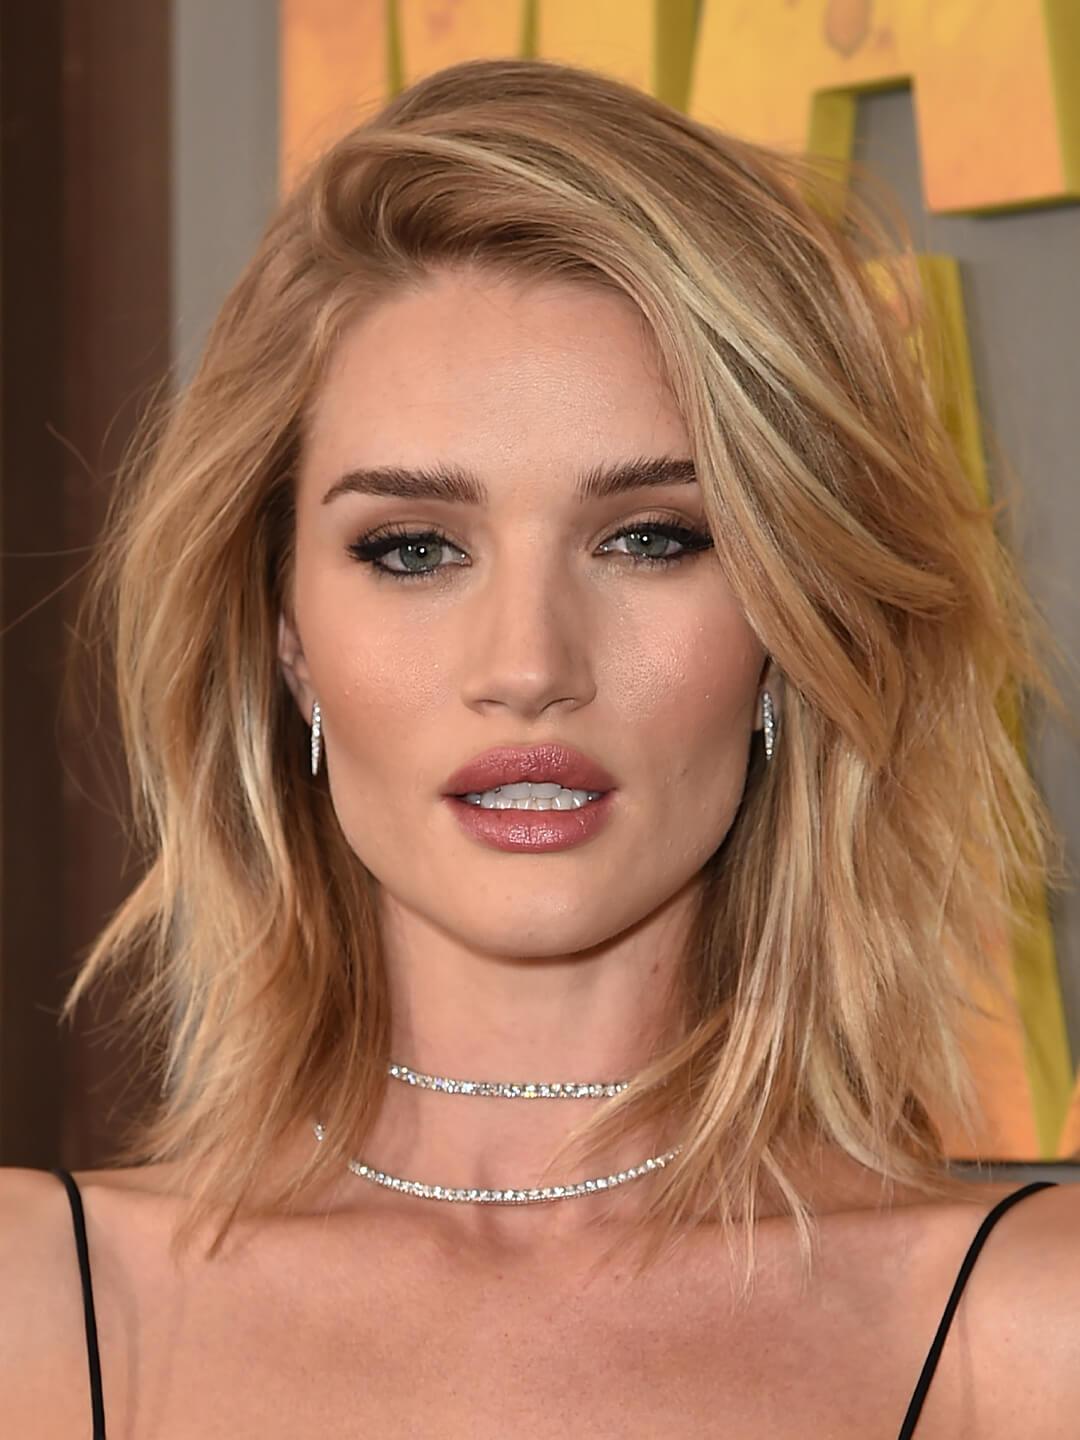 Rosie Huntington-Whiteley glammed up with a layered medium length hairstyle